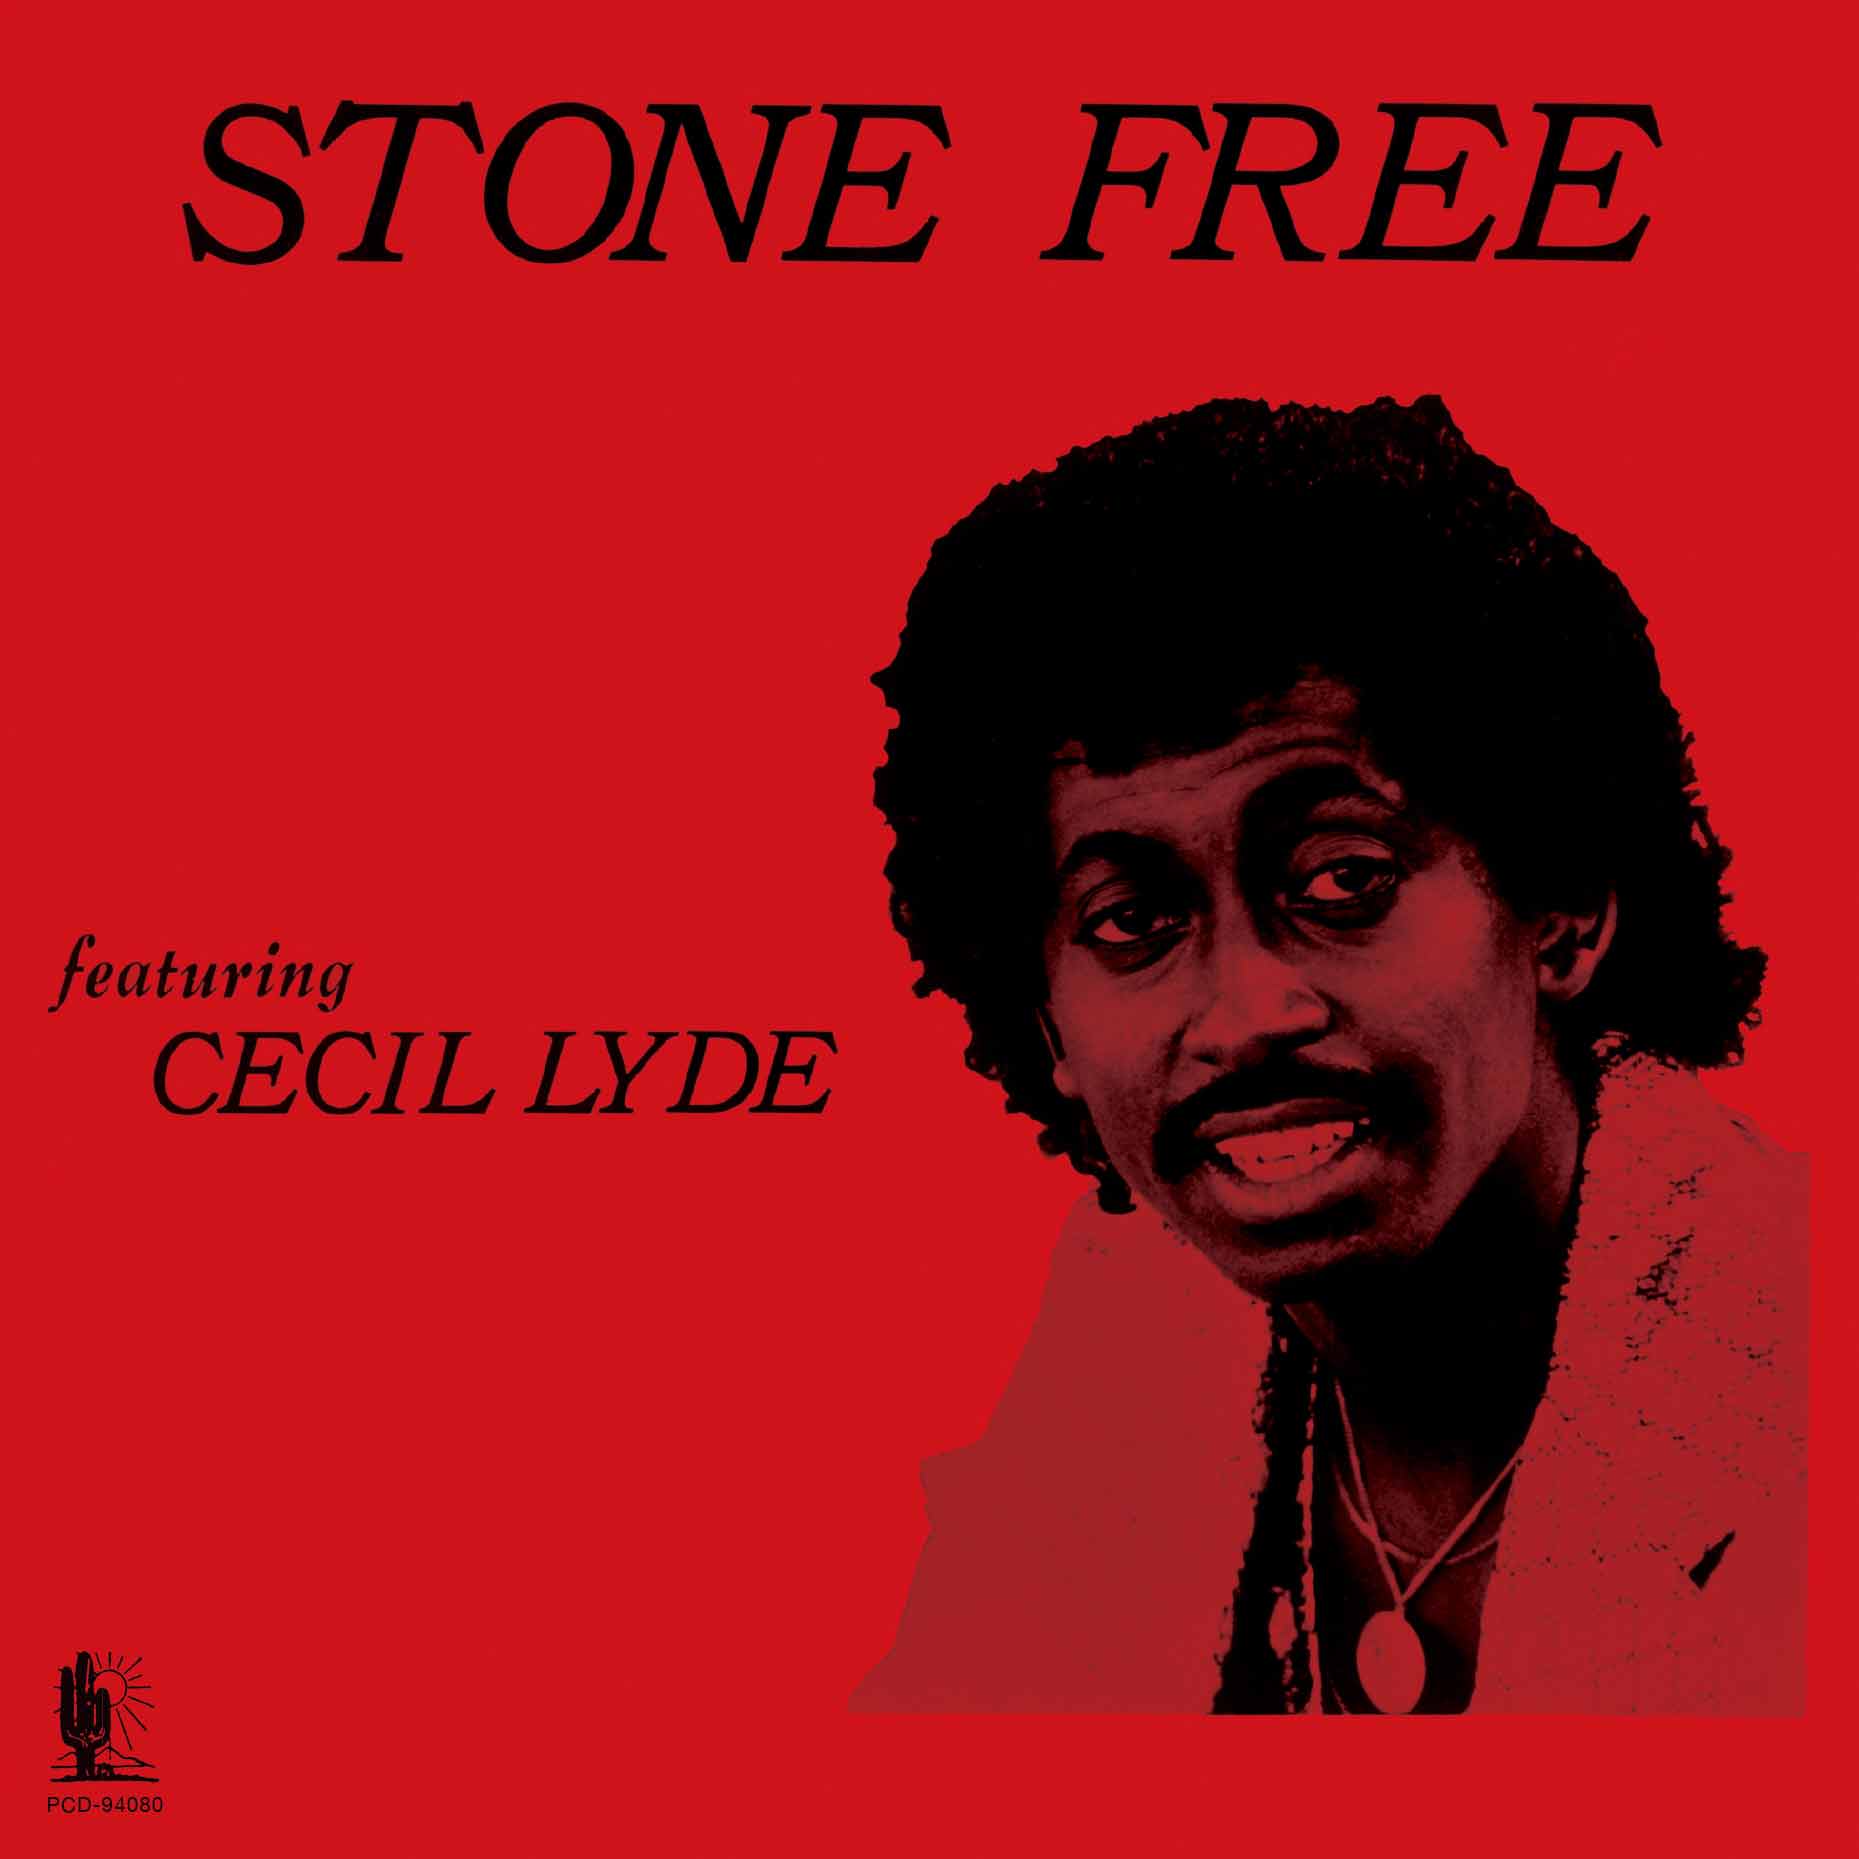 CECIL LYDE